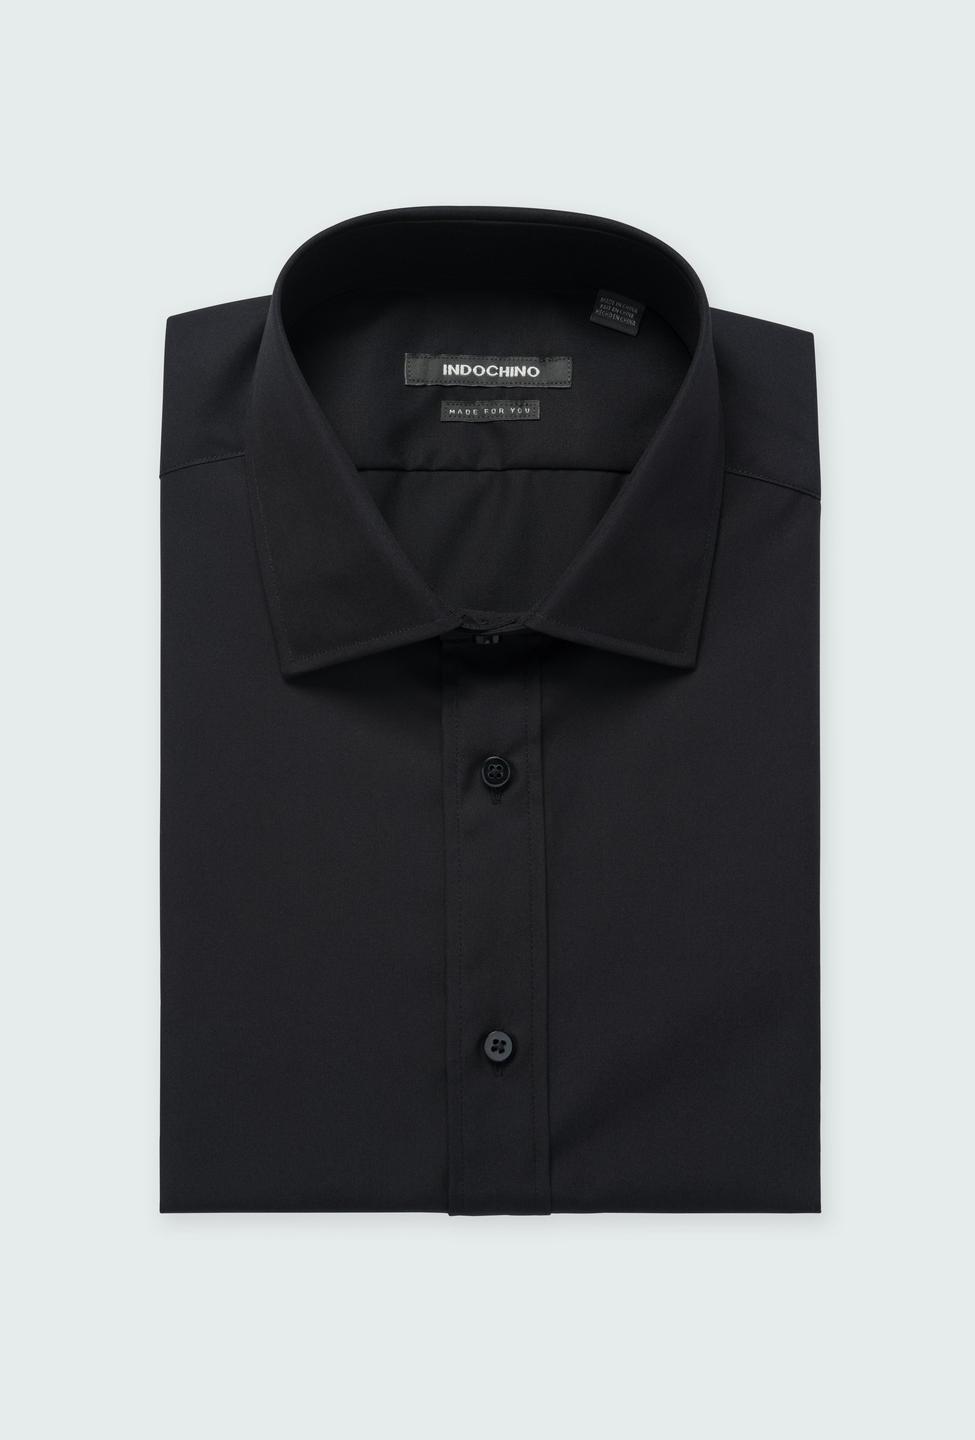 Black shirt - Helston Solid Design from Premium Indochino Collection